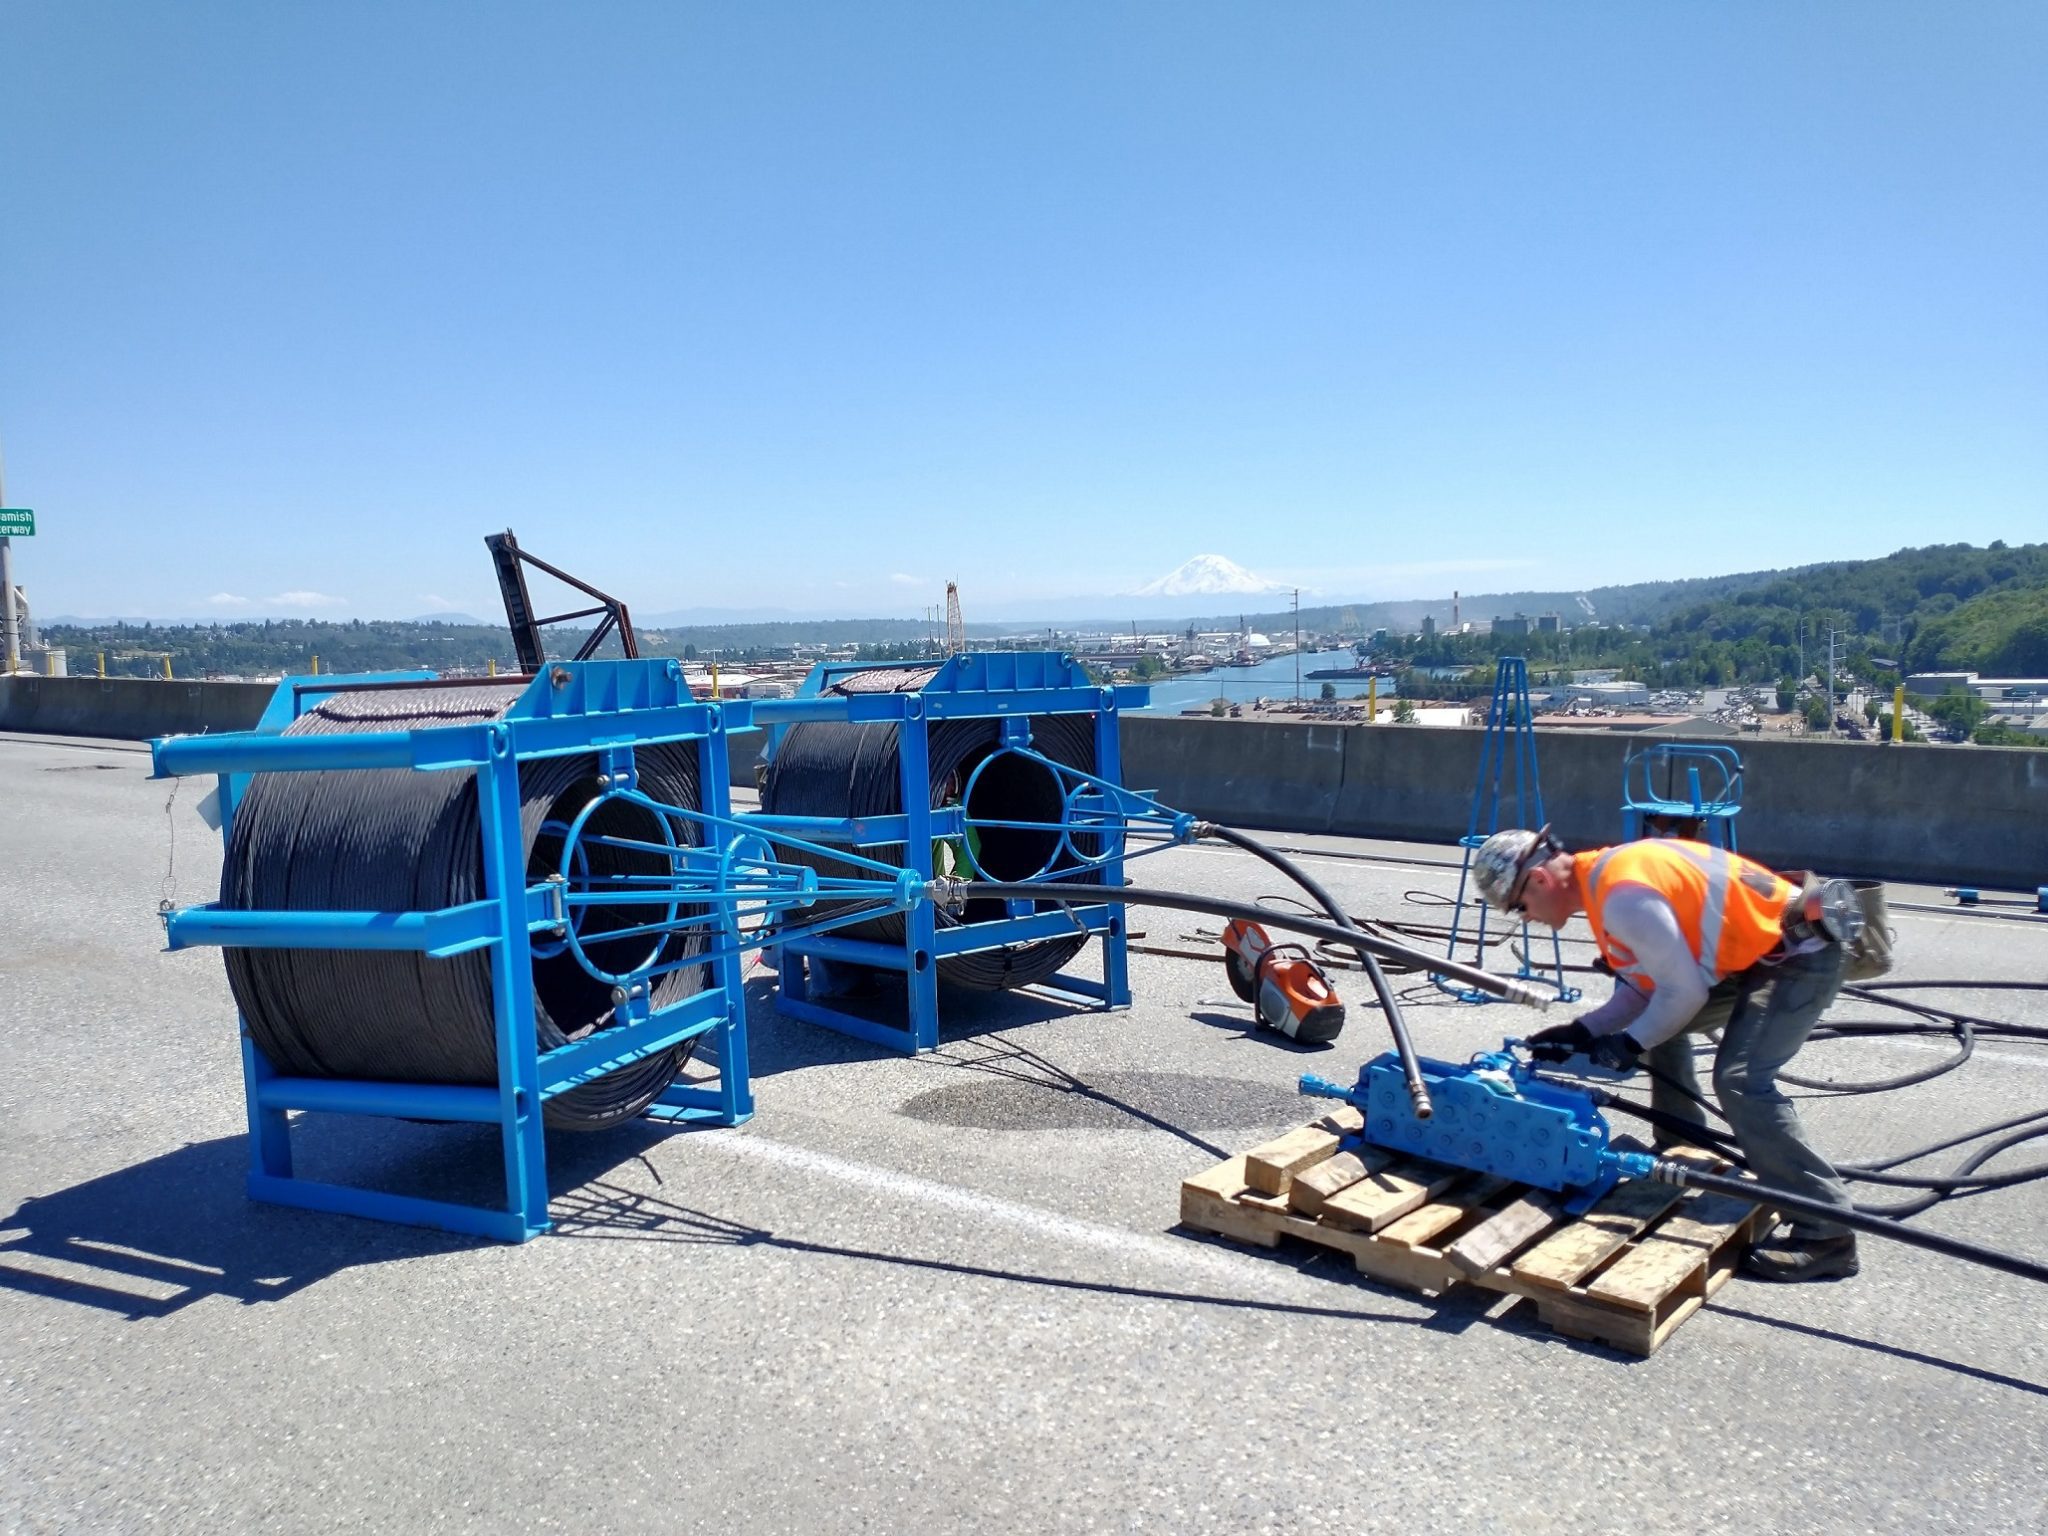 One construction worker works on post-tensioning cables atop the West Seattle Bridge, on a sunny day. Mount Rainier is in the background, below blue skies.